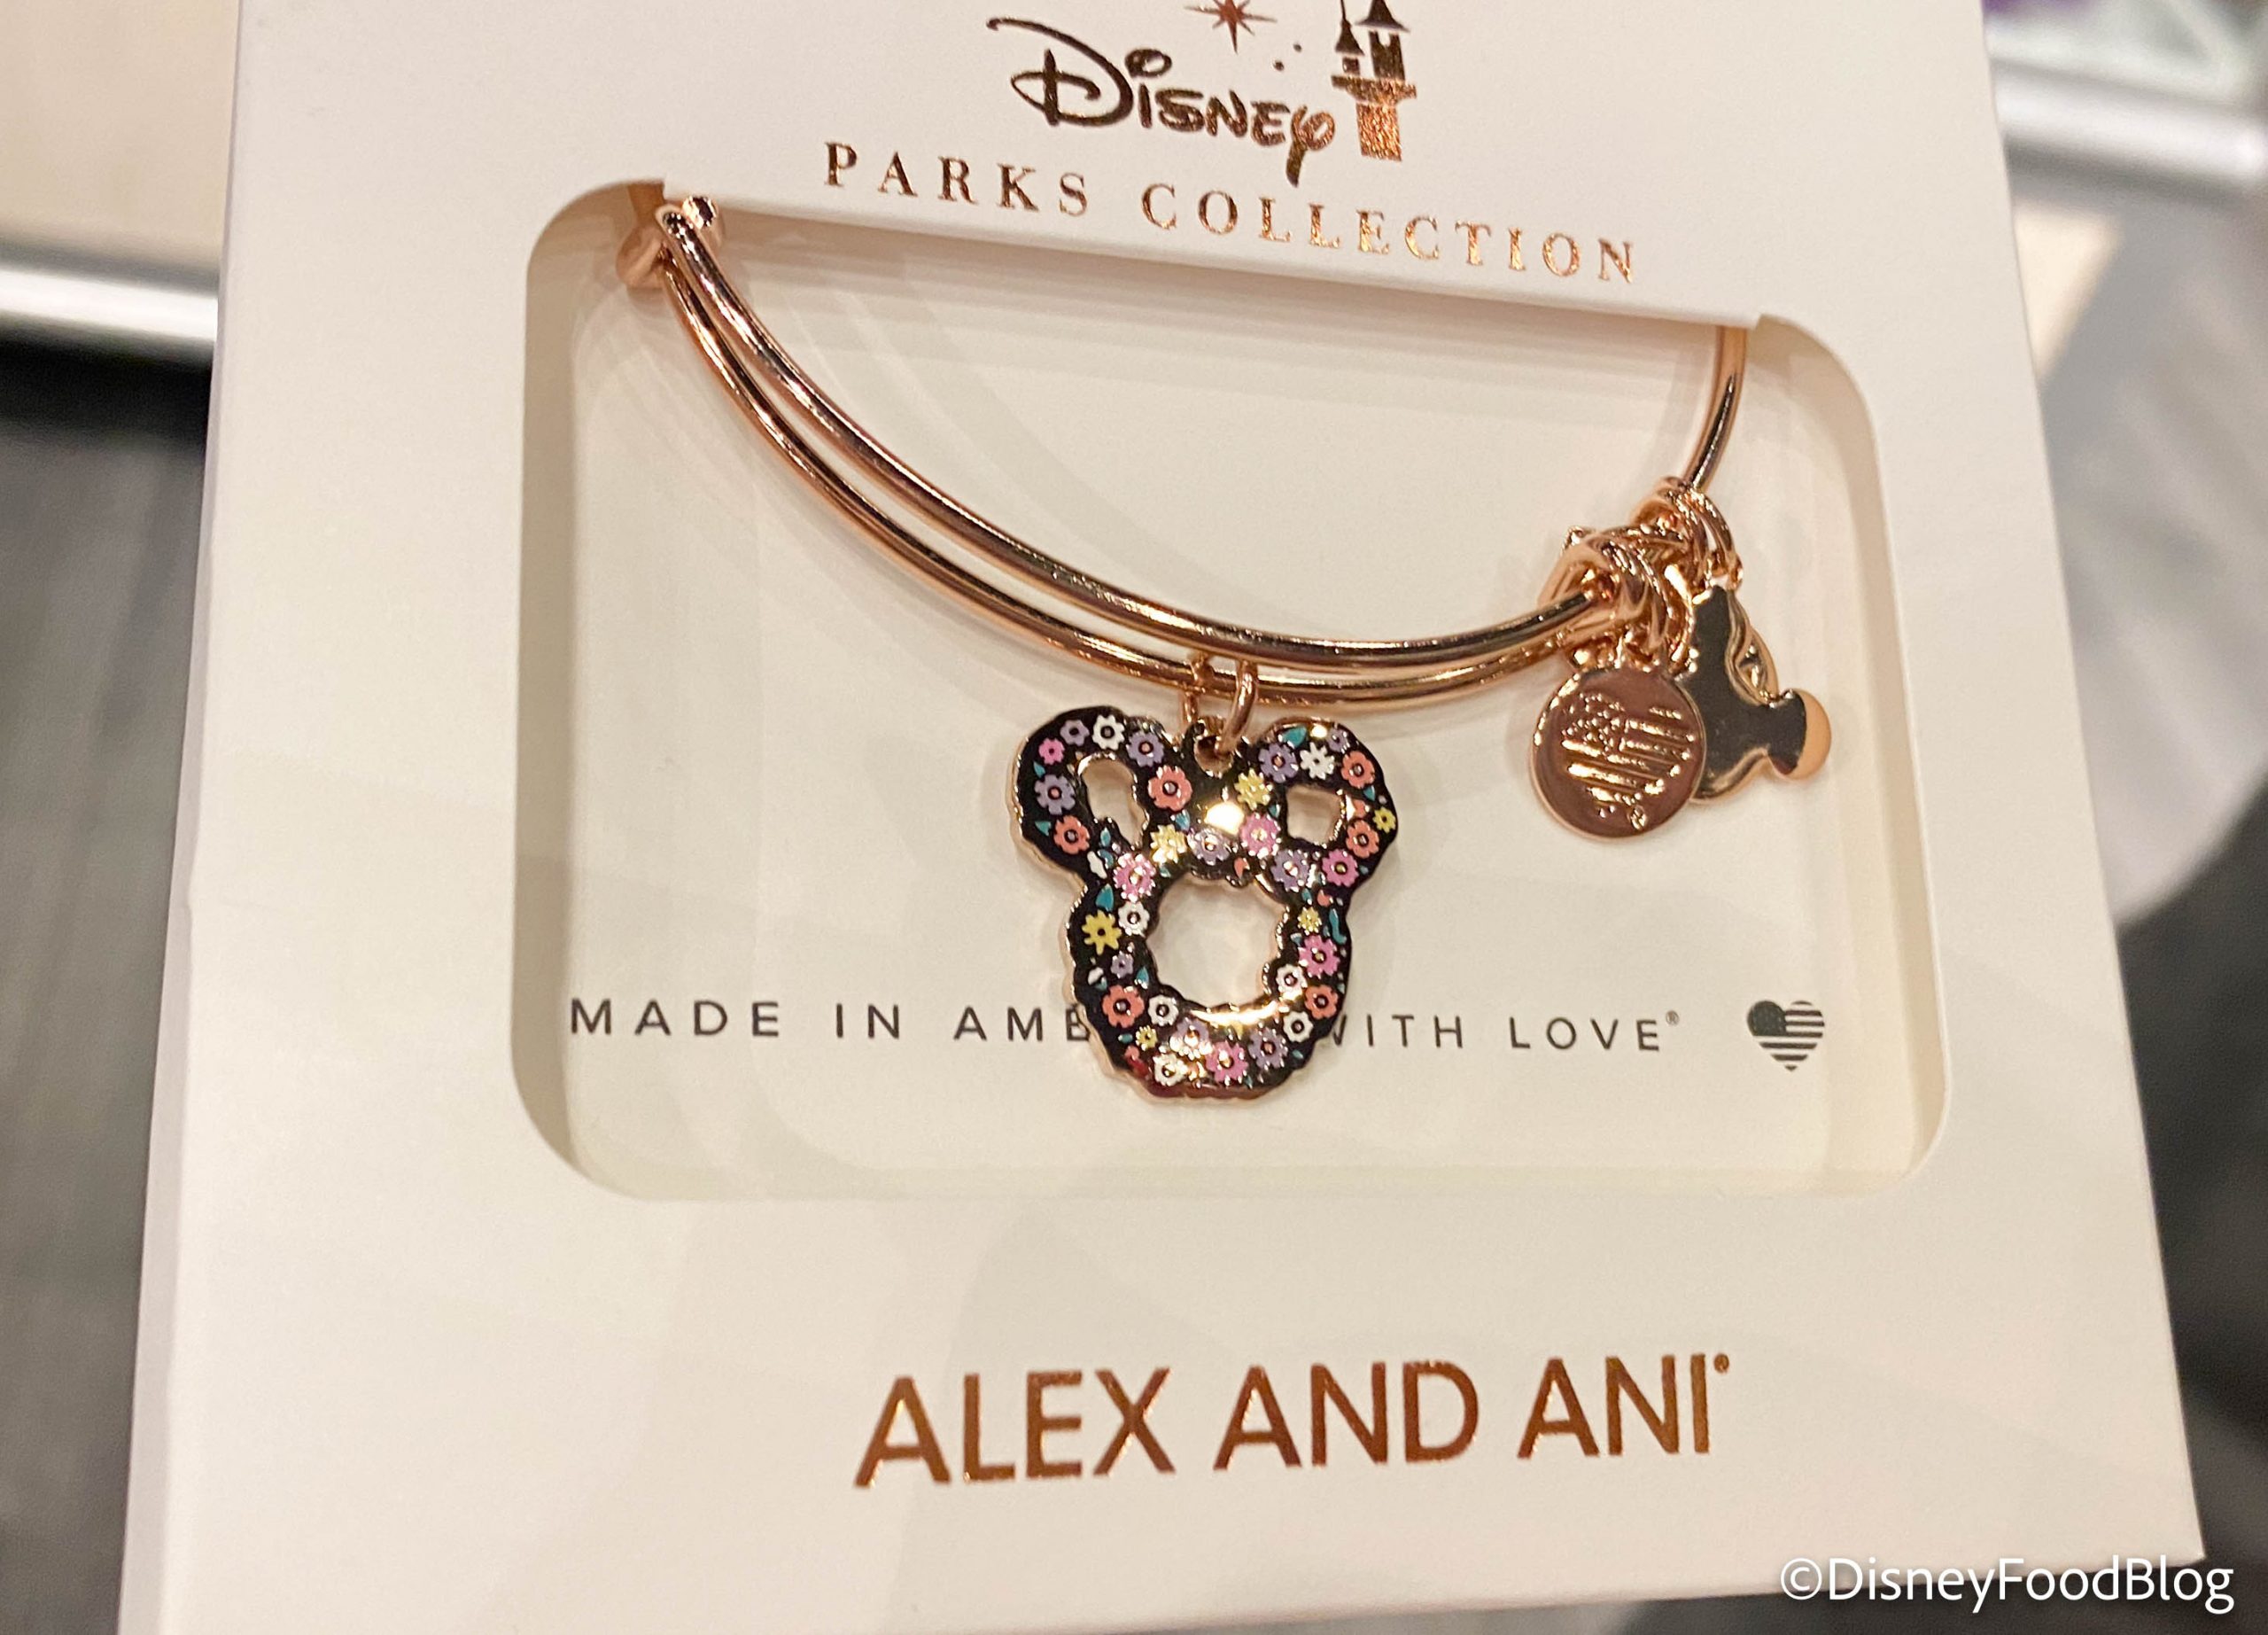 NEWS: The Creator of Some of Your Favorite Disney Jewelry Just Filed ...